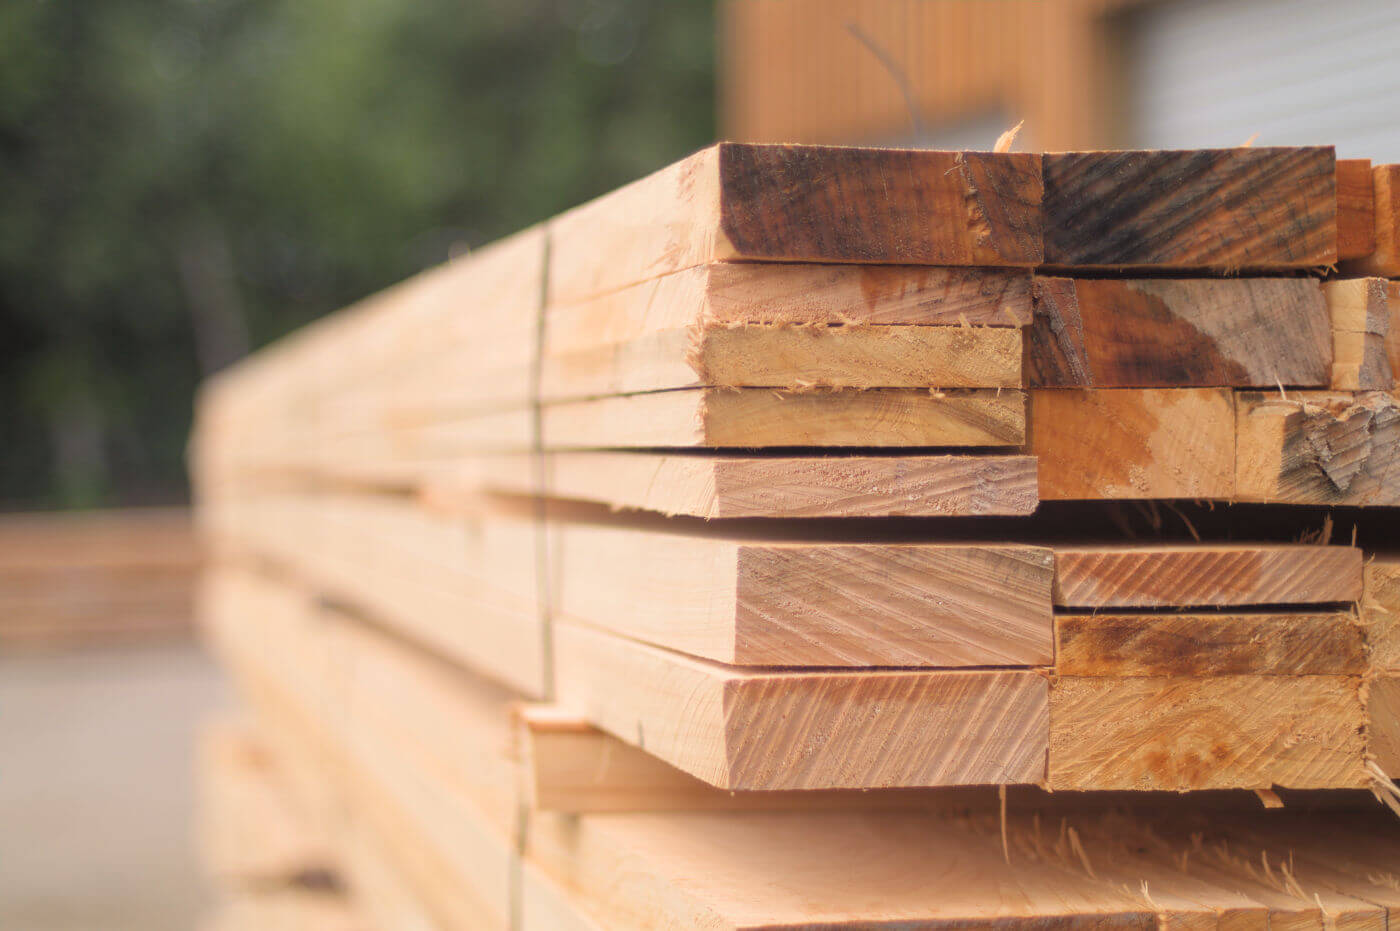 A stack of roughsawn timber